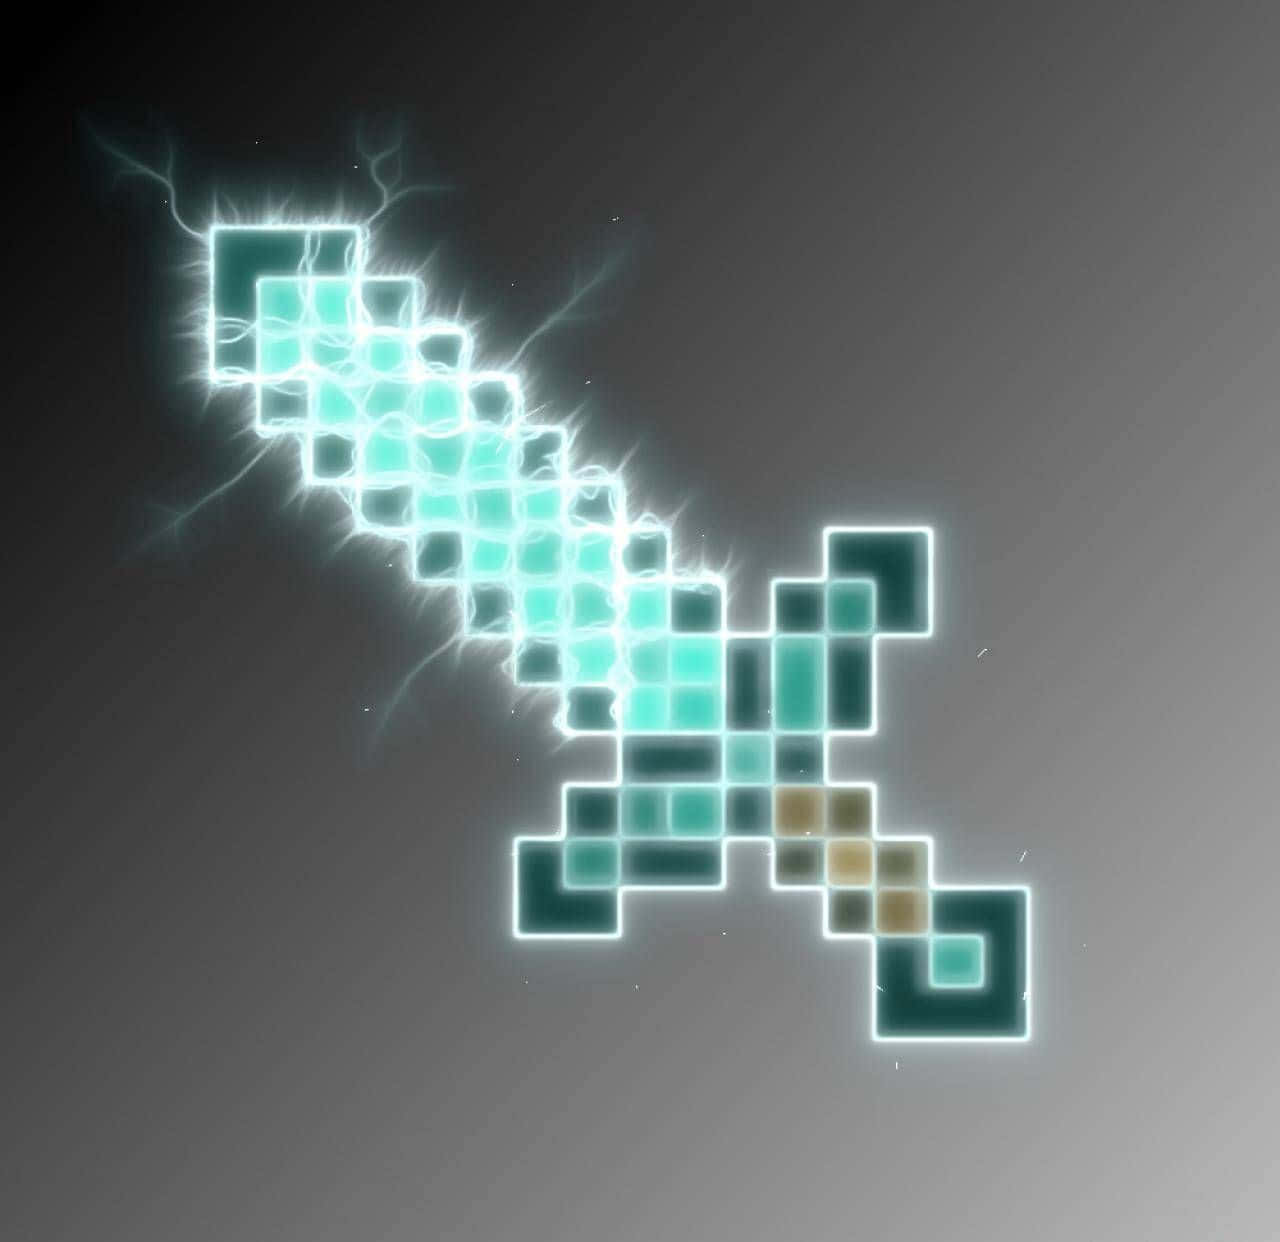 Epic Minecraft Weapons Ready for Battle Wallpaper